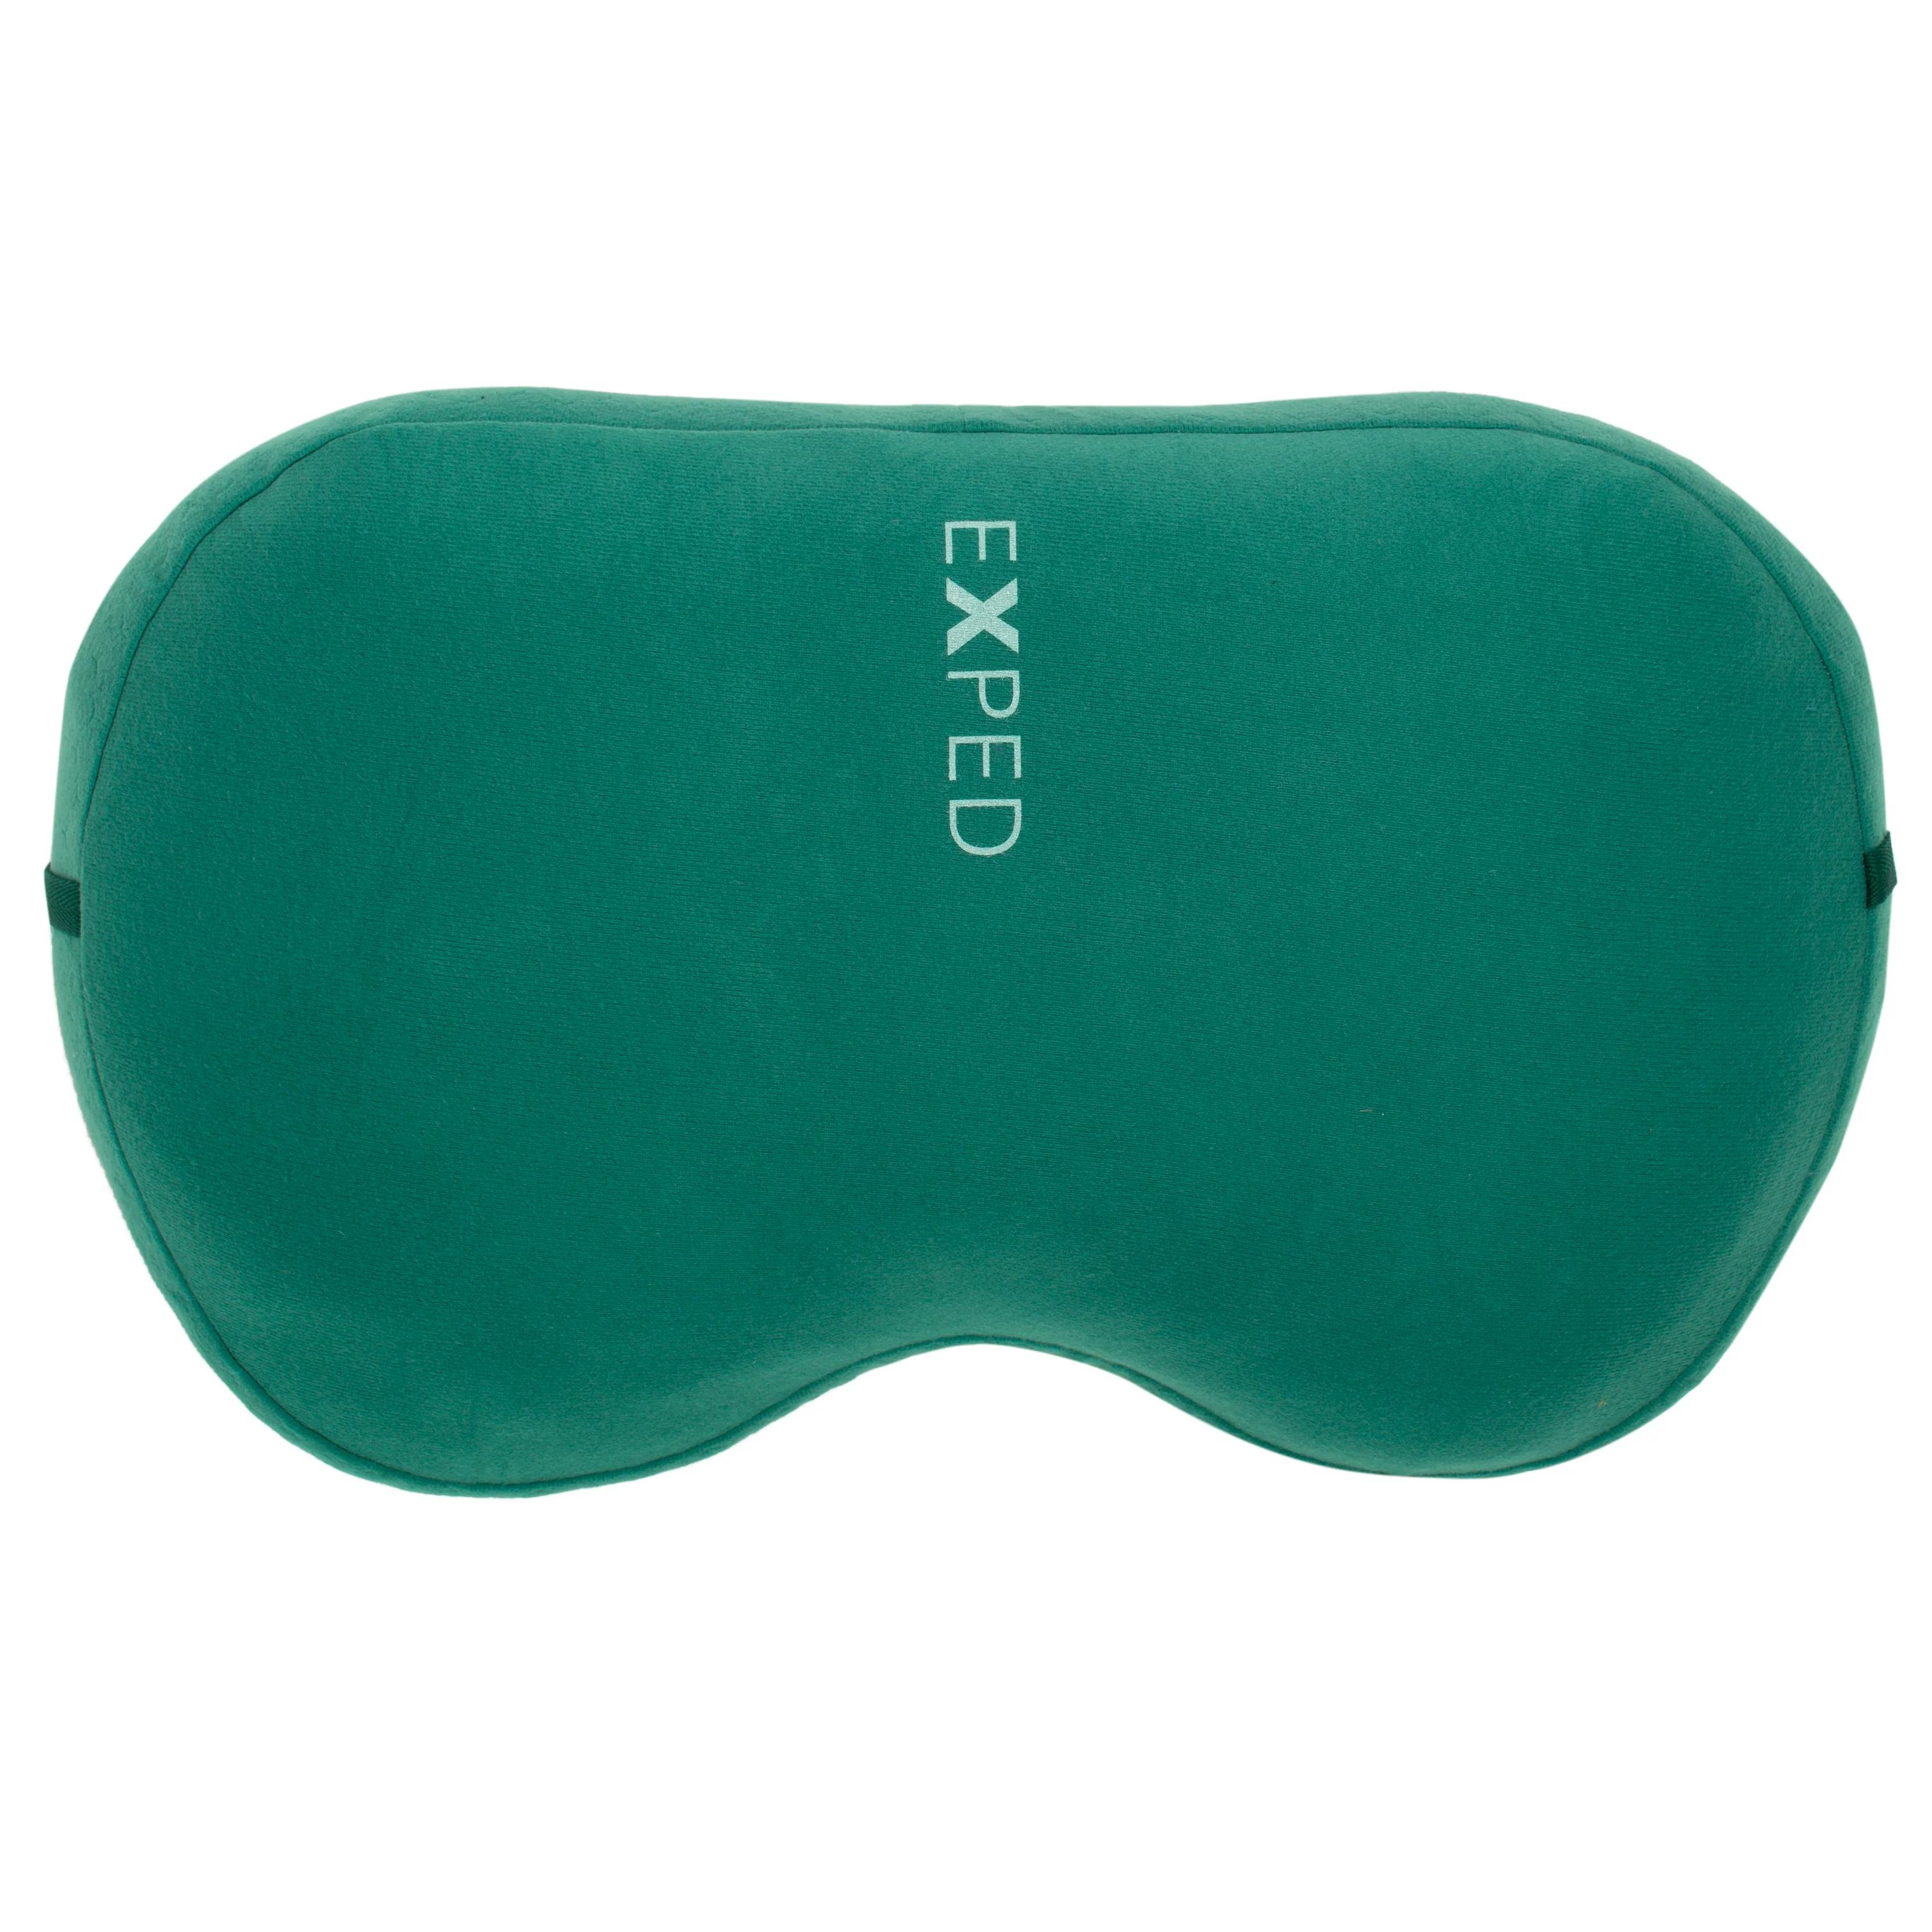 Exped DownPillow L Cypress